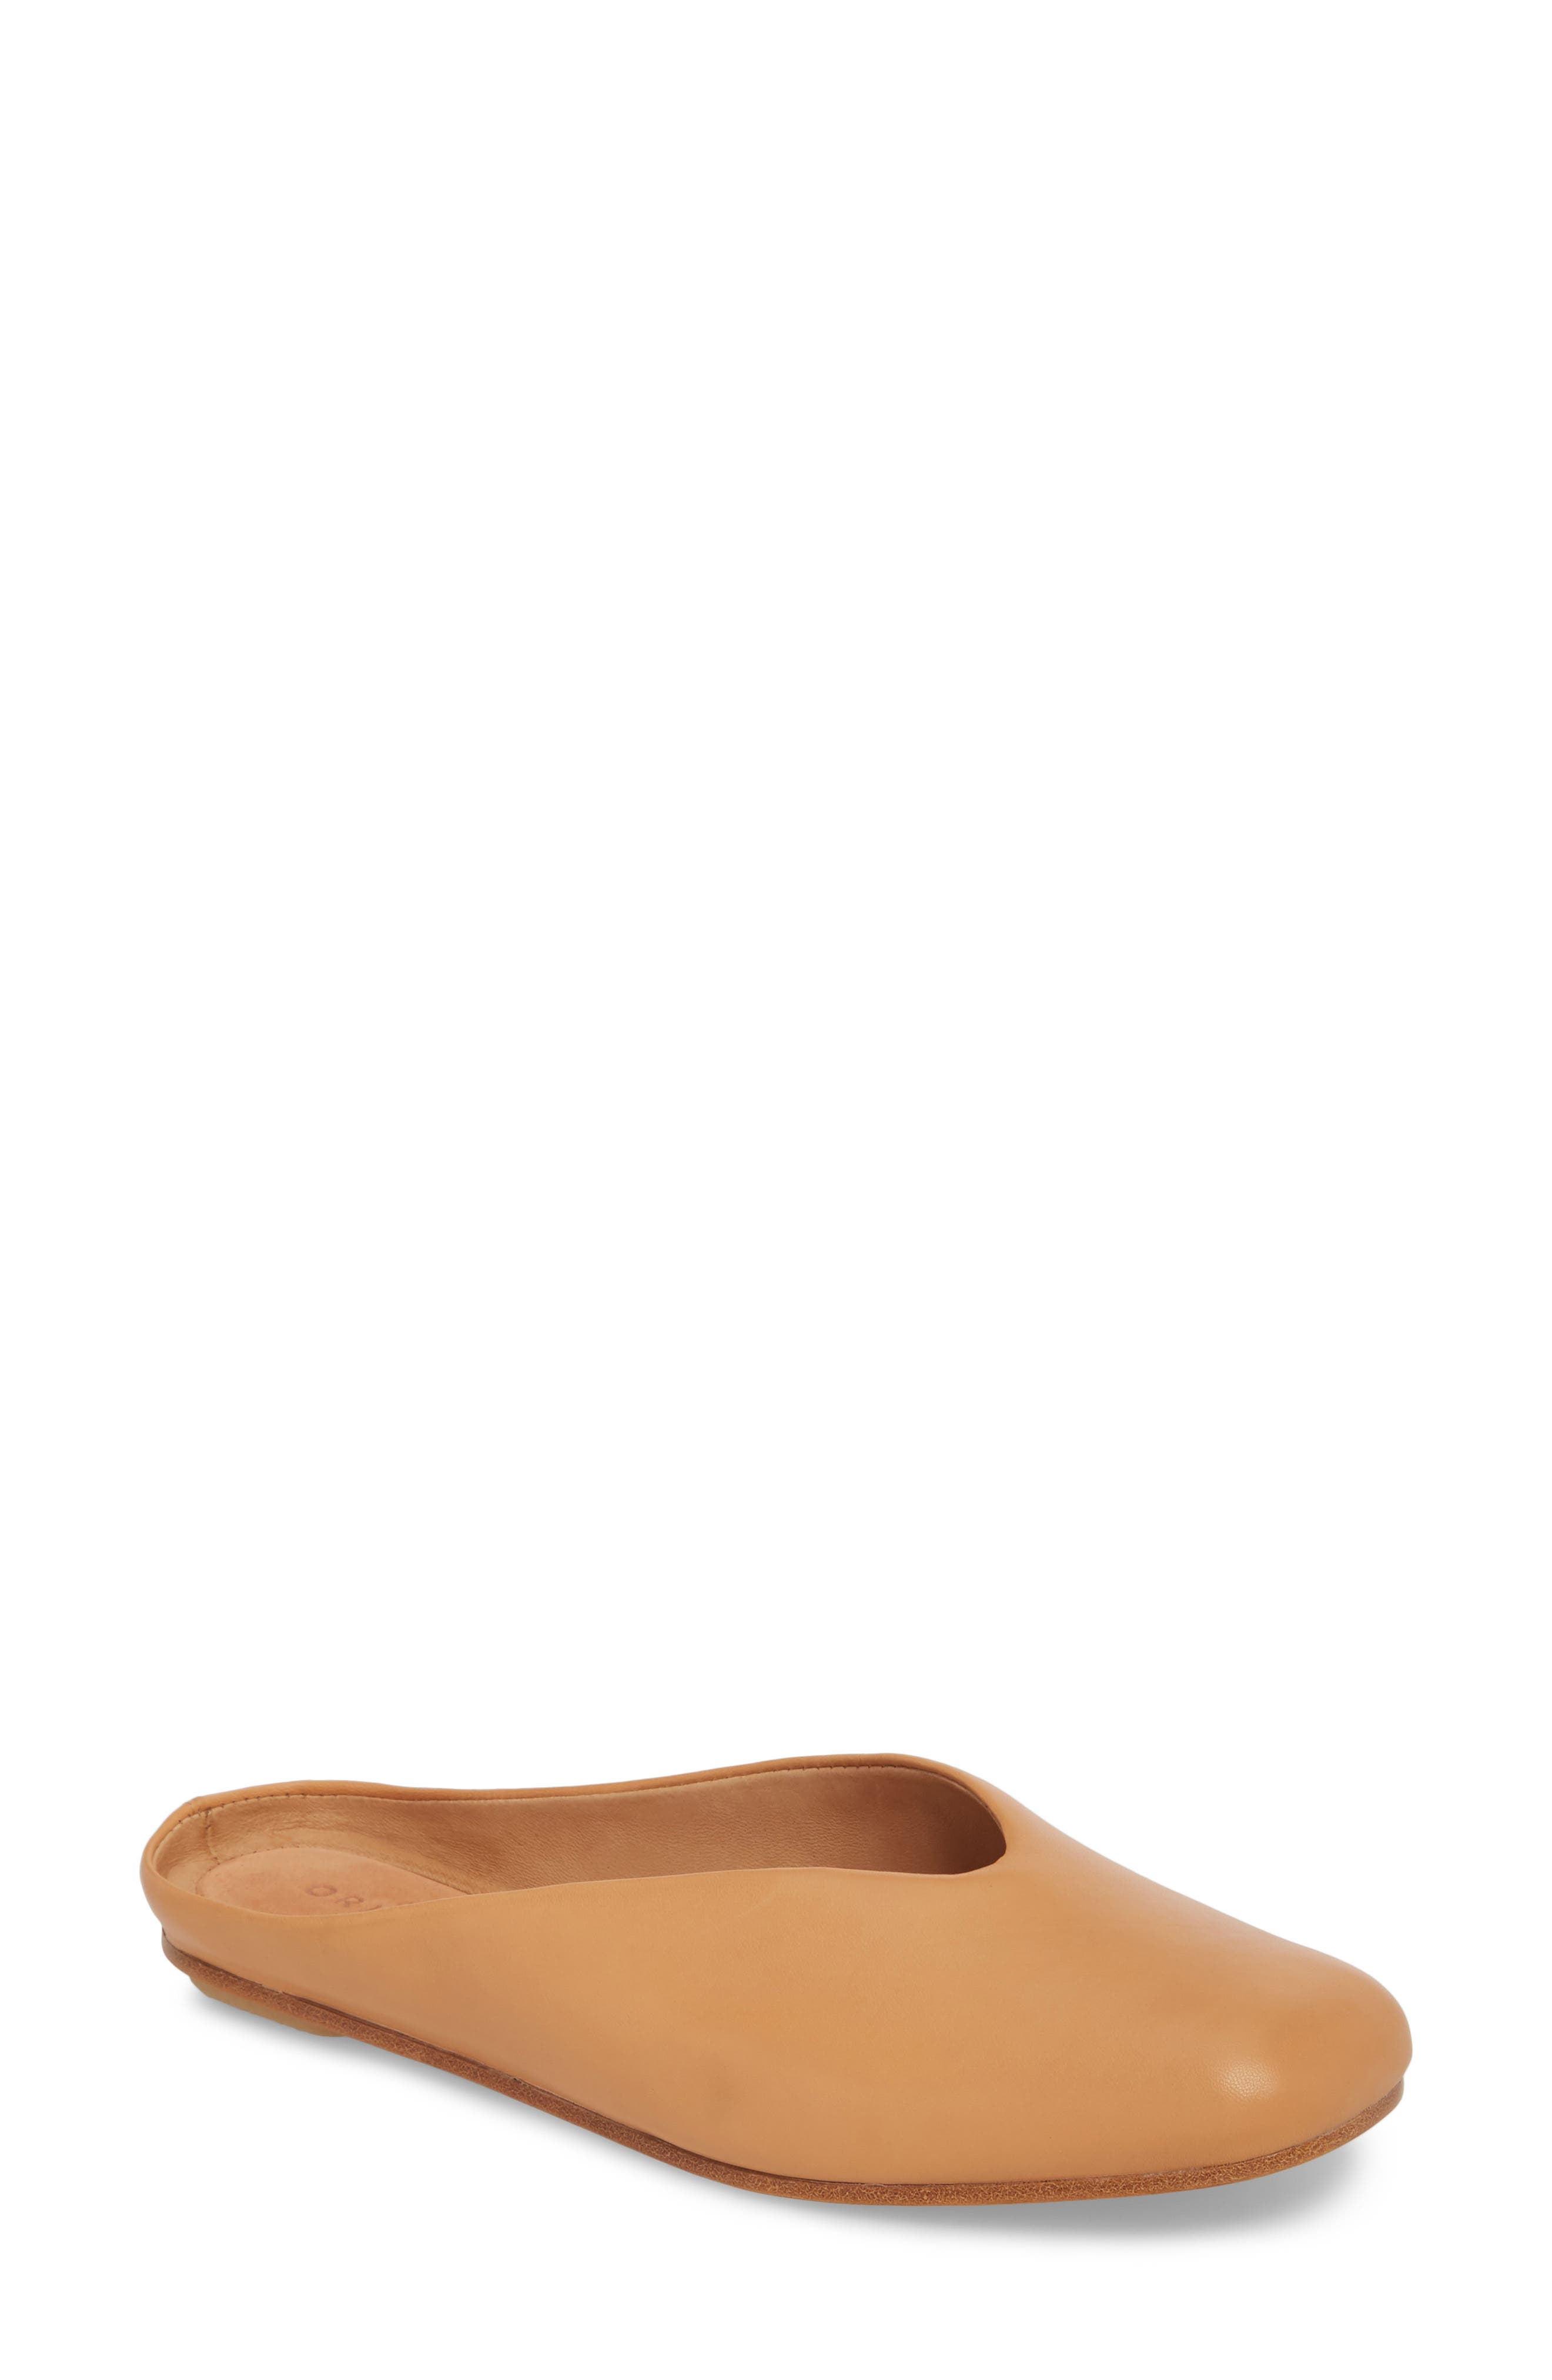 clarks backless women's shoes